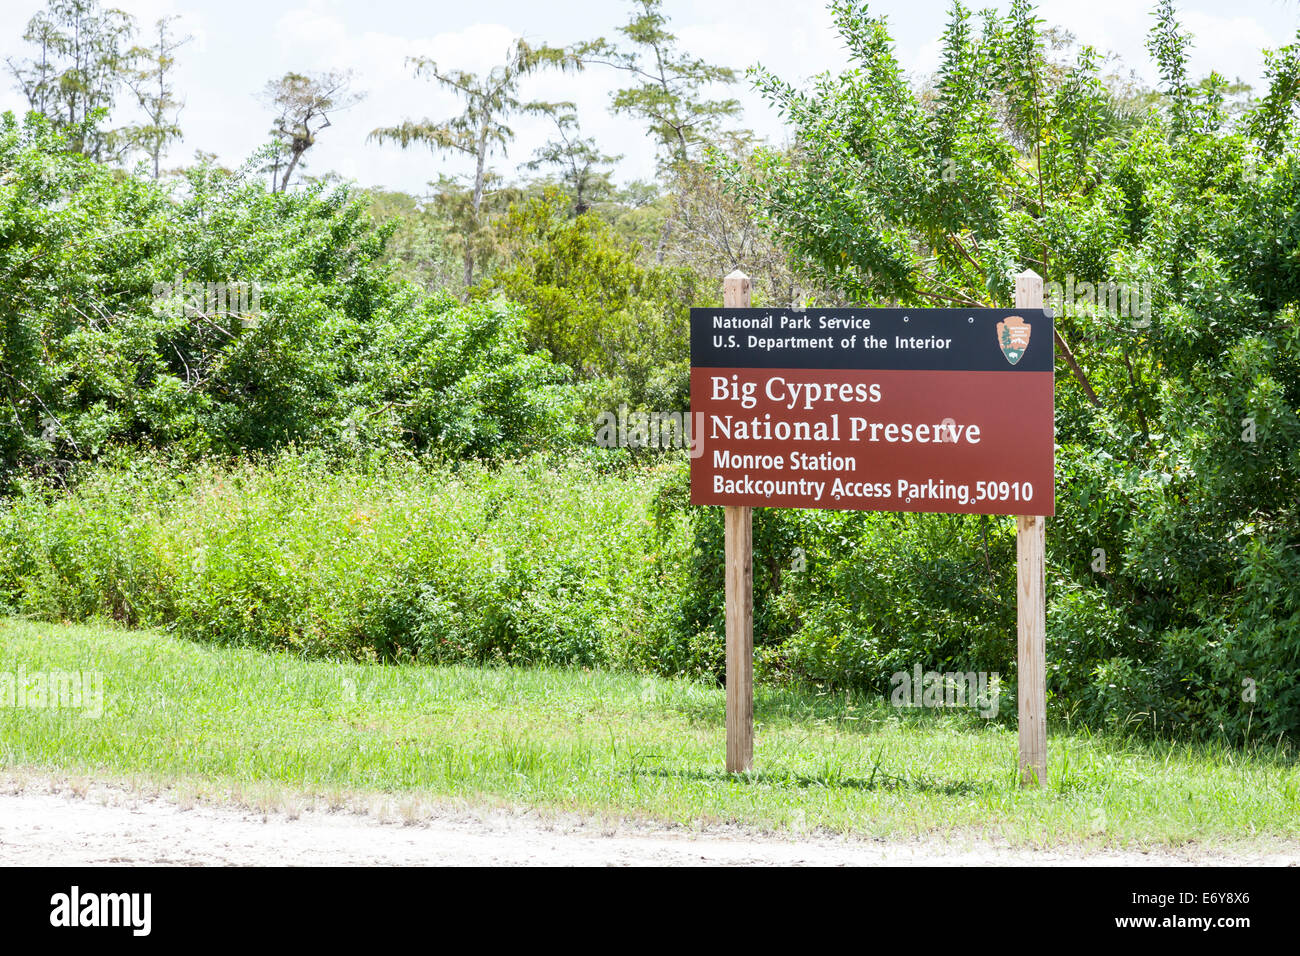 Big Cypress National Preserve Monroe Station back country access parking sign in in the Florida Everglades. Stock Photo